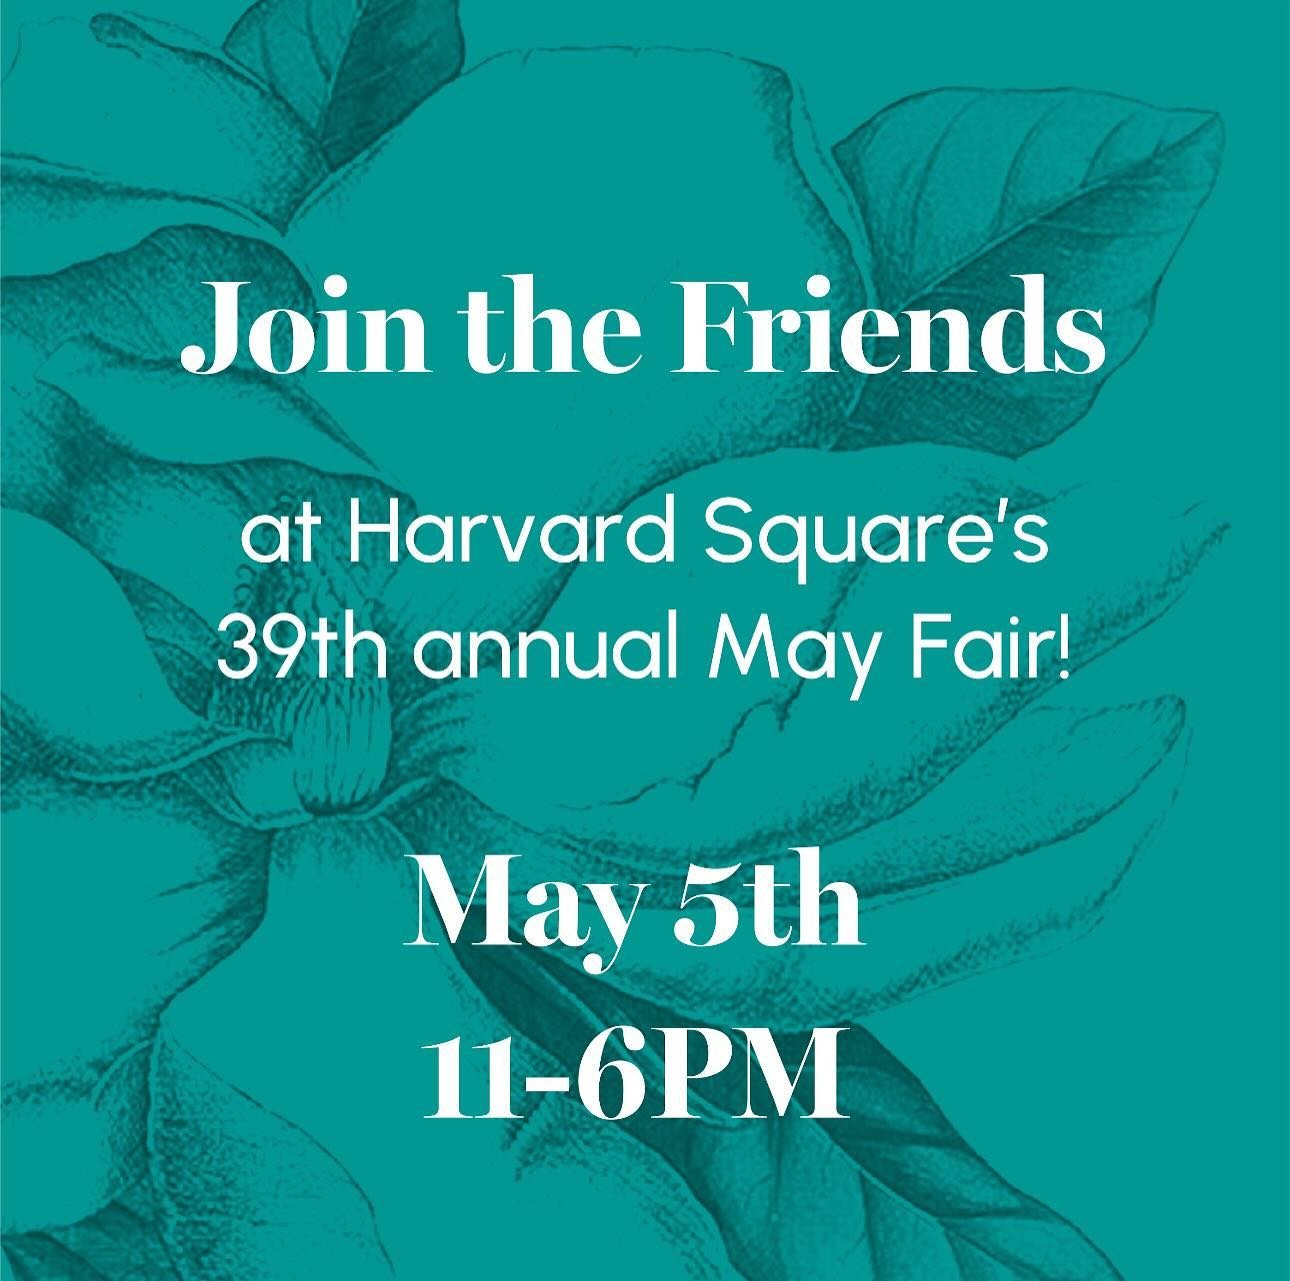 The Friends of the Cambridge Public Library will have a booth on JFK Street promoting the 2024 Secret Garden Tour. We will answer any questions you may have about the garden tour and what the Friends support. Tickets will go live tmrw. Stop by and sa